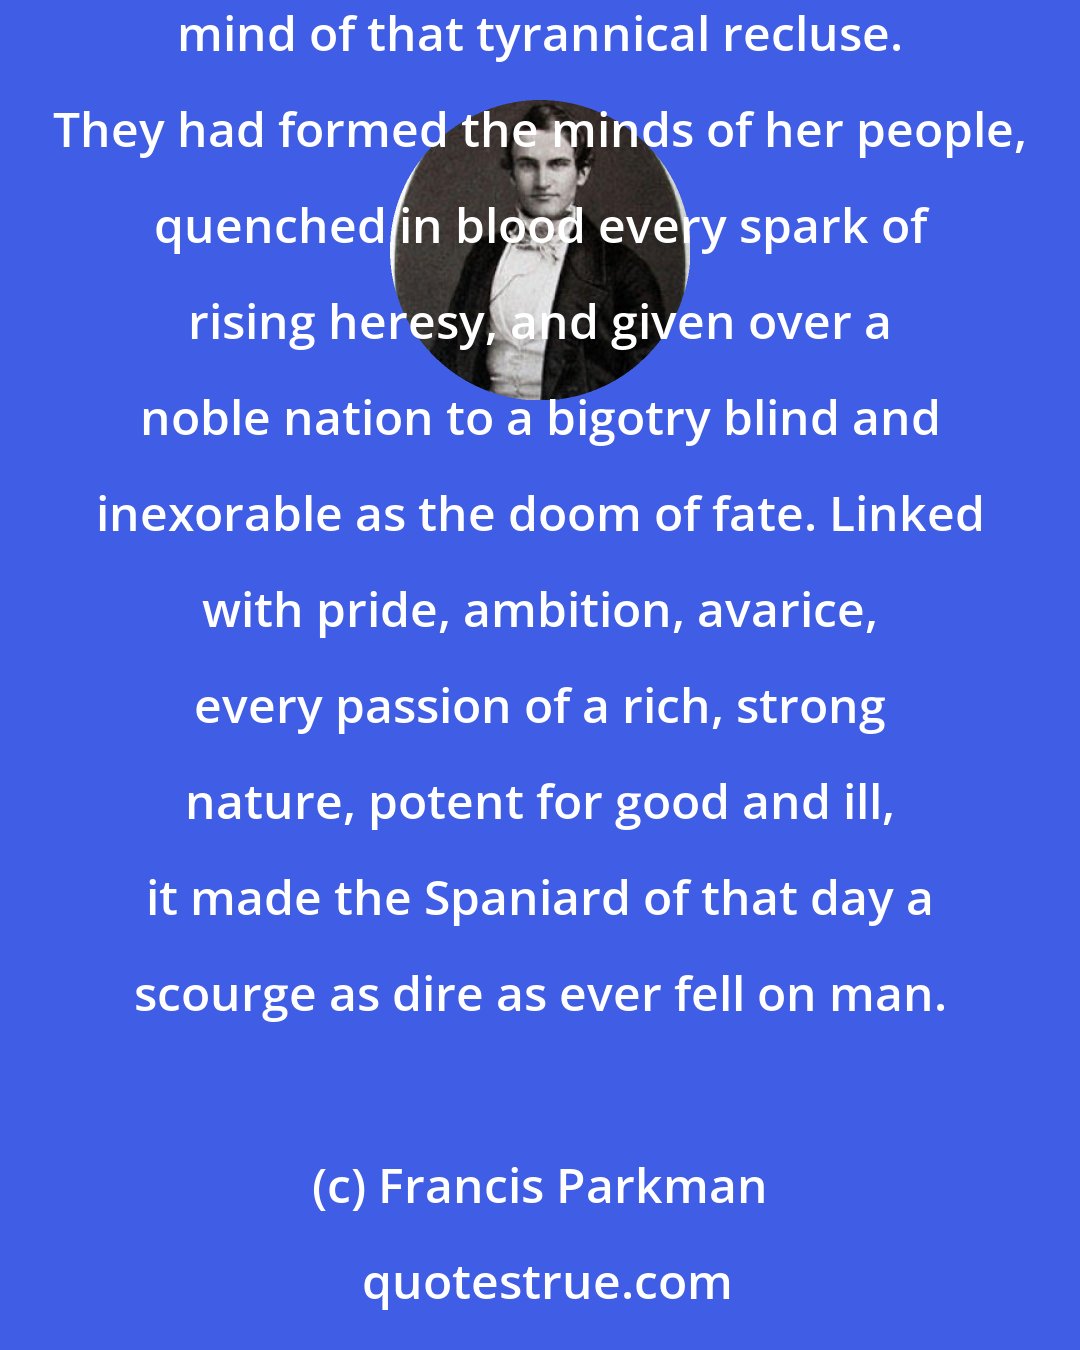 Francis Parkman: The monk, the inquisitor, and the Jesuit were lords of Spain,- sovereigns of her sovereign, for they had formed the dark and narrow mind of that tyrannical recluse. They had formed the minds of her people, quenched in blood every spark of rising heresy, and given over a noble nation to a bigotry blind and inexorable as the doom of fate. Linked with pride, ambition, avarice, every passion of a rich, strong nature, potent for good and ill, it made the Spaniard of that day a scourge as dire as ever fell on man.